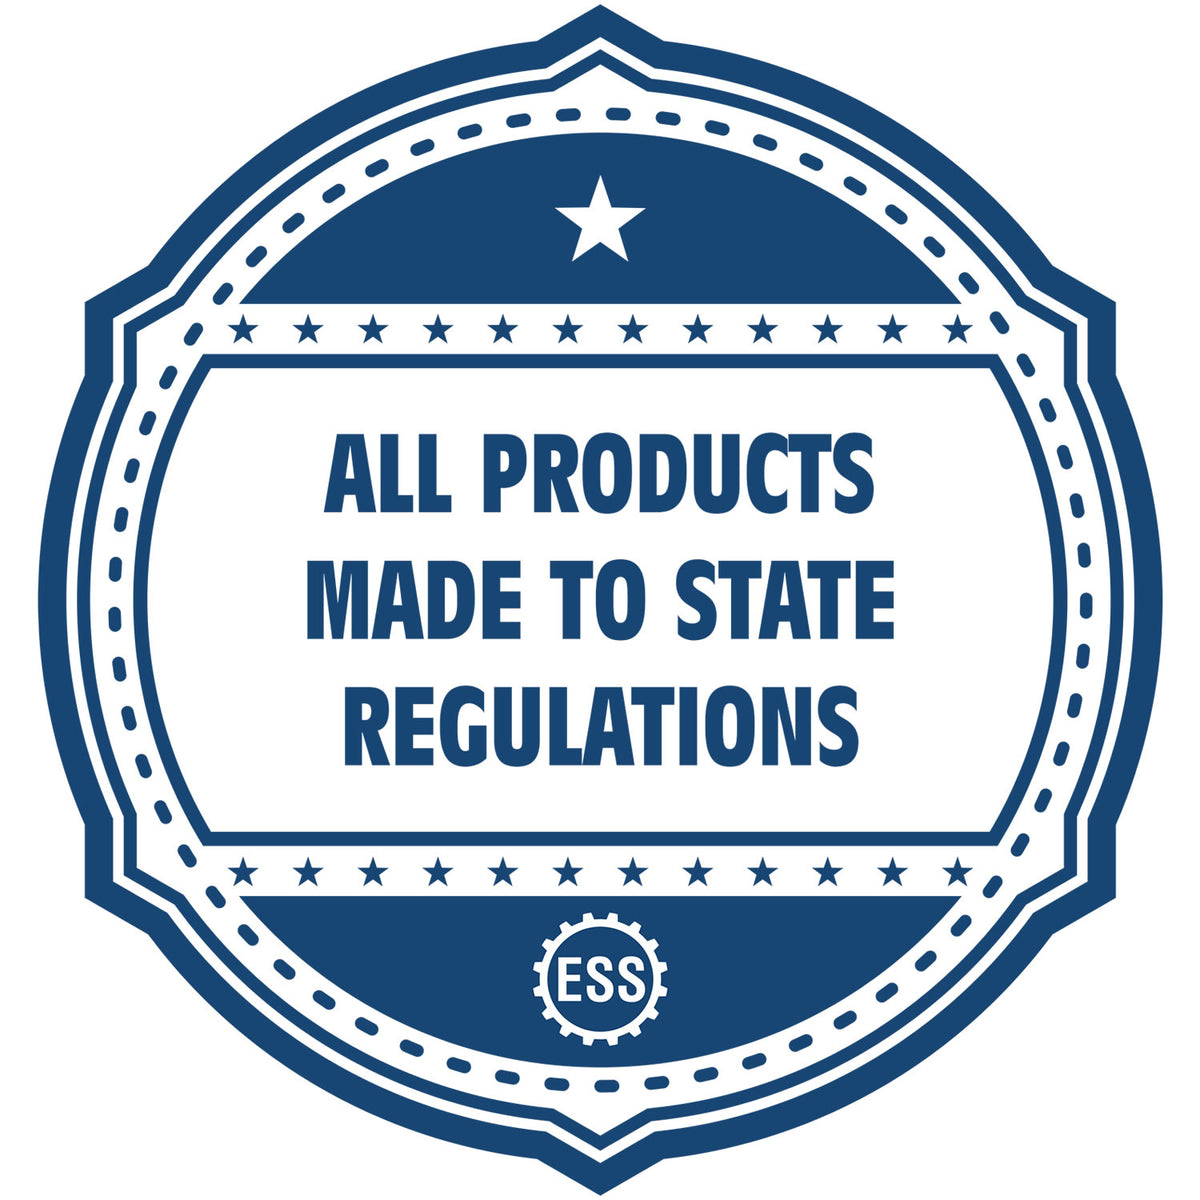 An icon or badge element for the Arkansas Engineer Desk Seal showing that this product is made in compliance with state regulations.